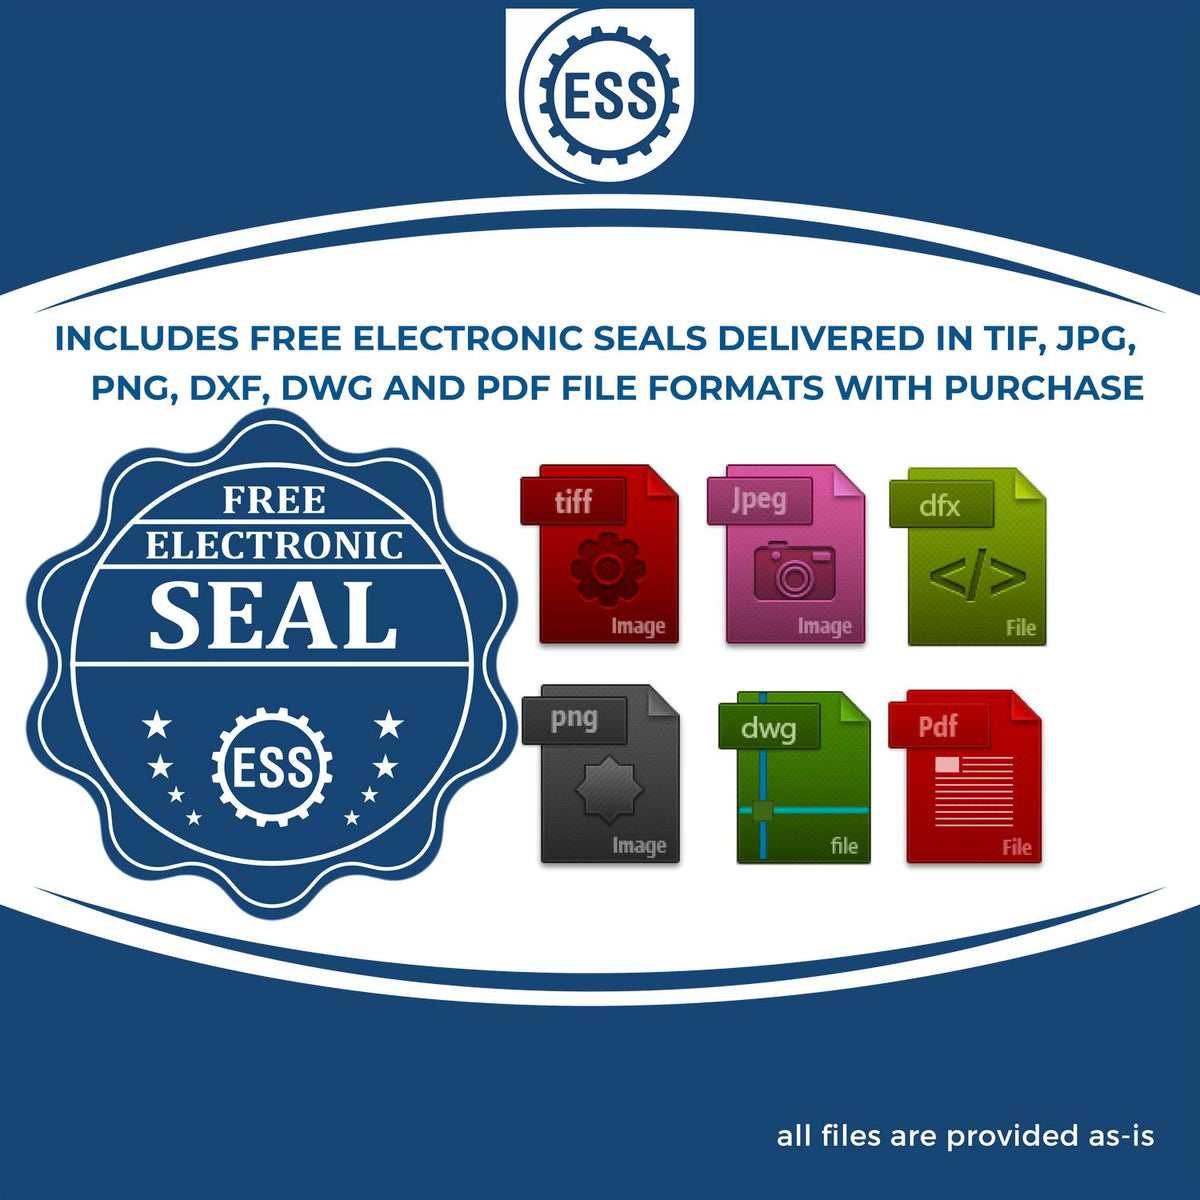 An infographic for the free electronic seal for the Extended Long Reach Hawaii Surveyor Embosser illustrating the different file type icons such as DXF, DWG, TIF, JPG and PNG.